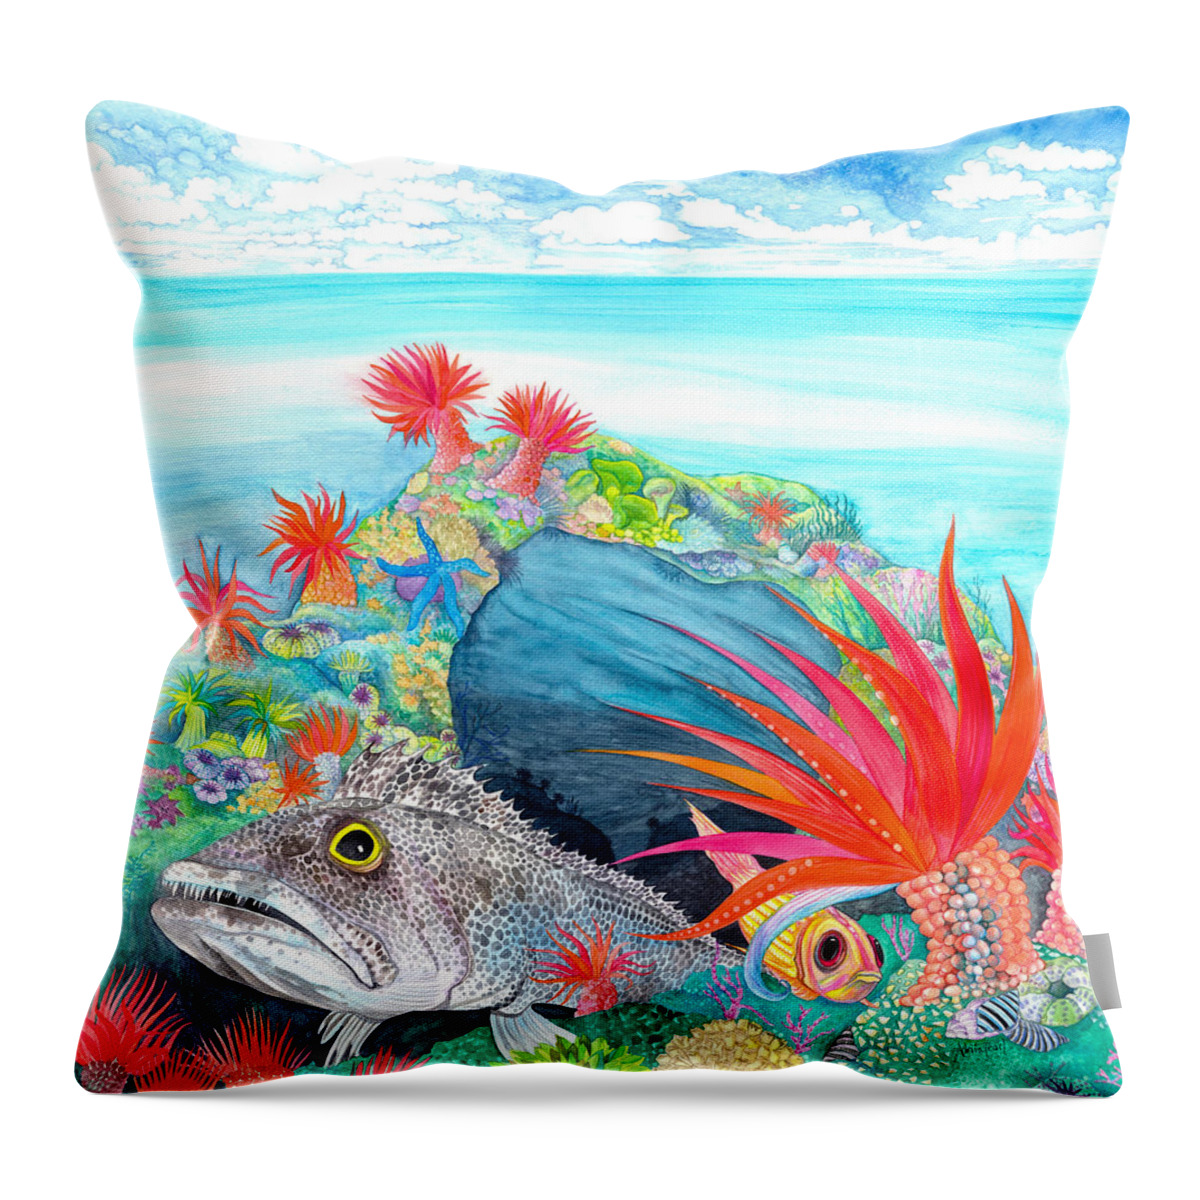 Adria Trail Throw Pillow featuring the painting Festive Fish by Adria Trail